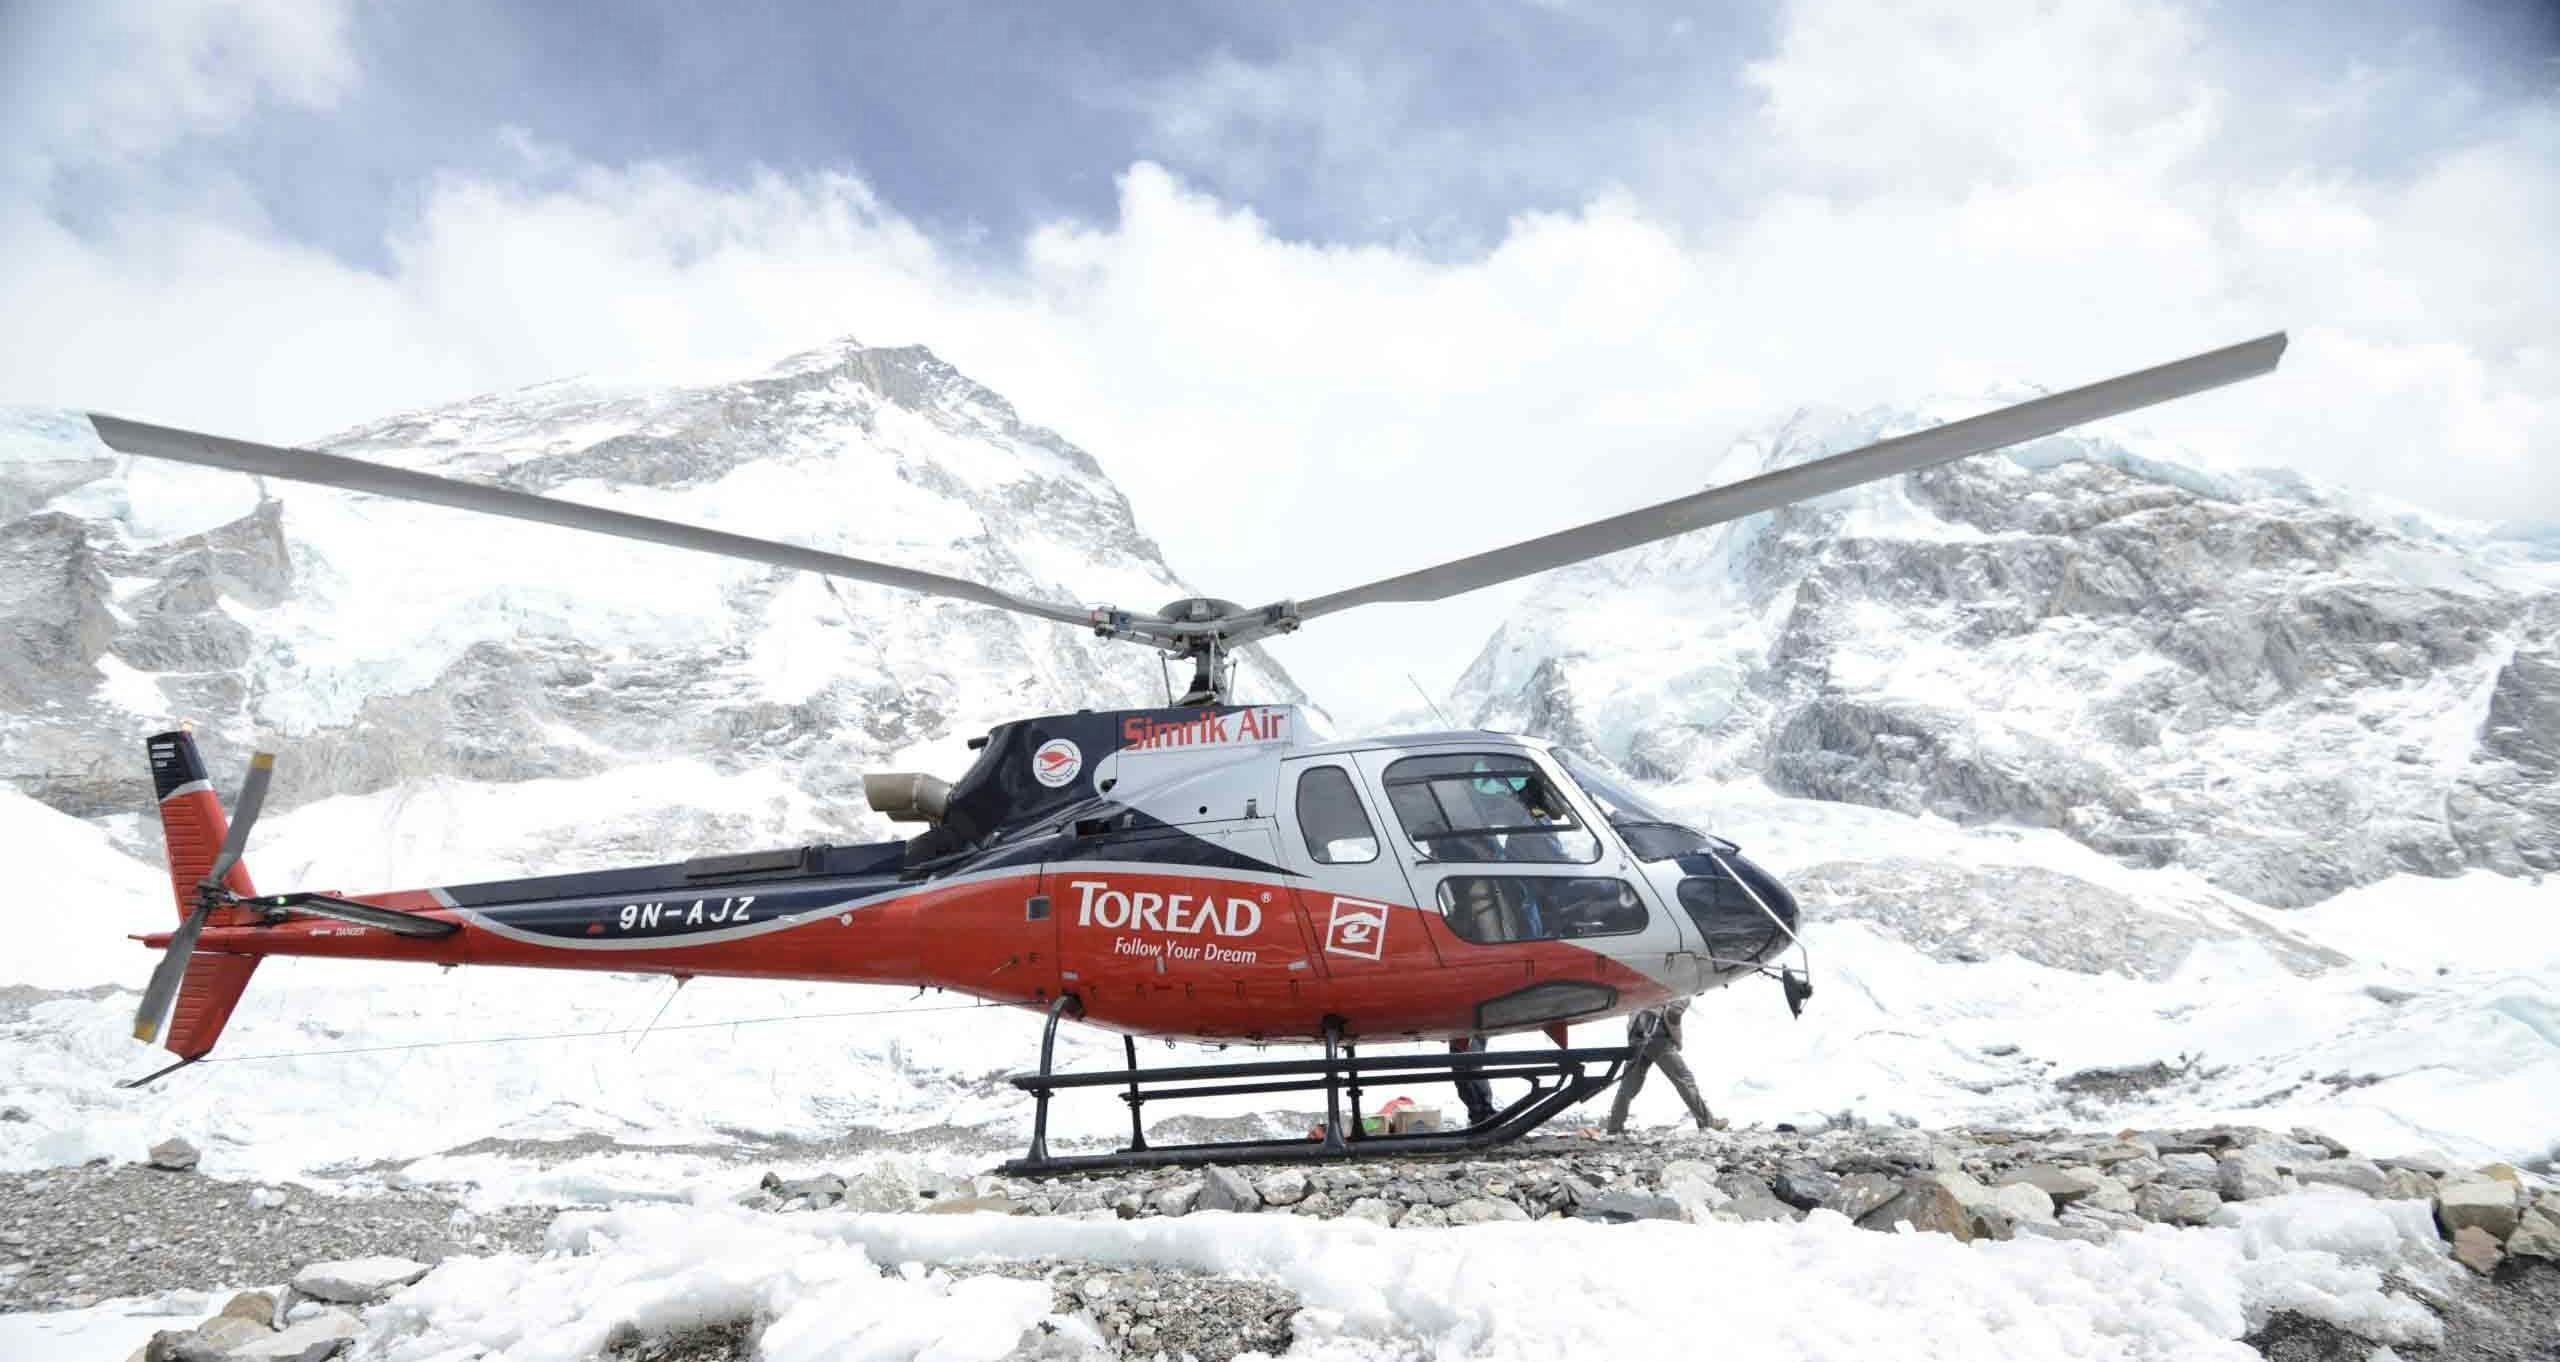 Annapurna Base camp Helicopter landing tour